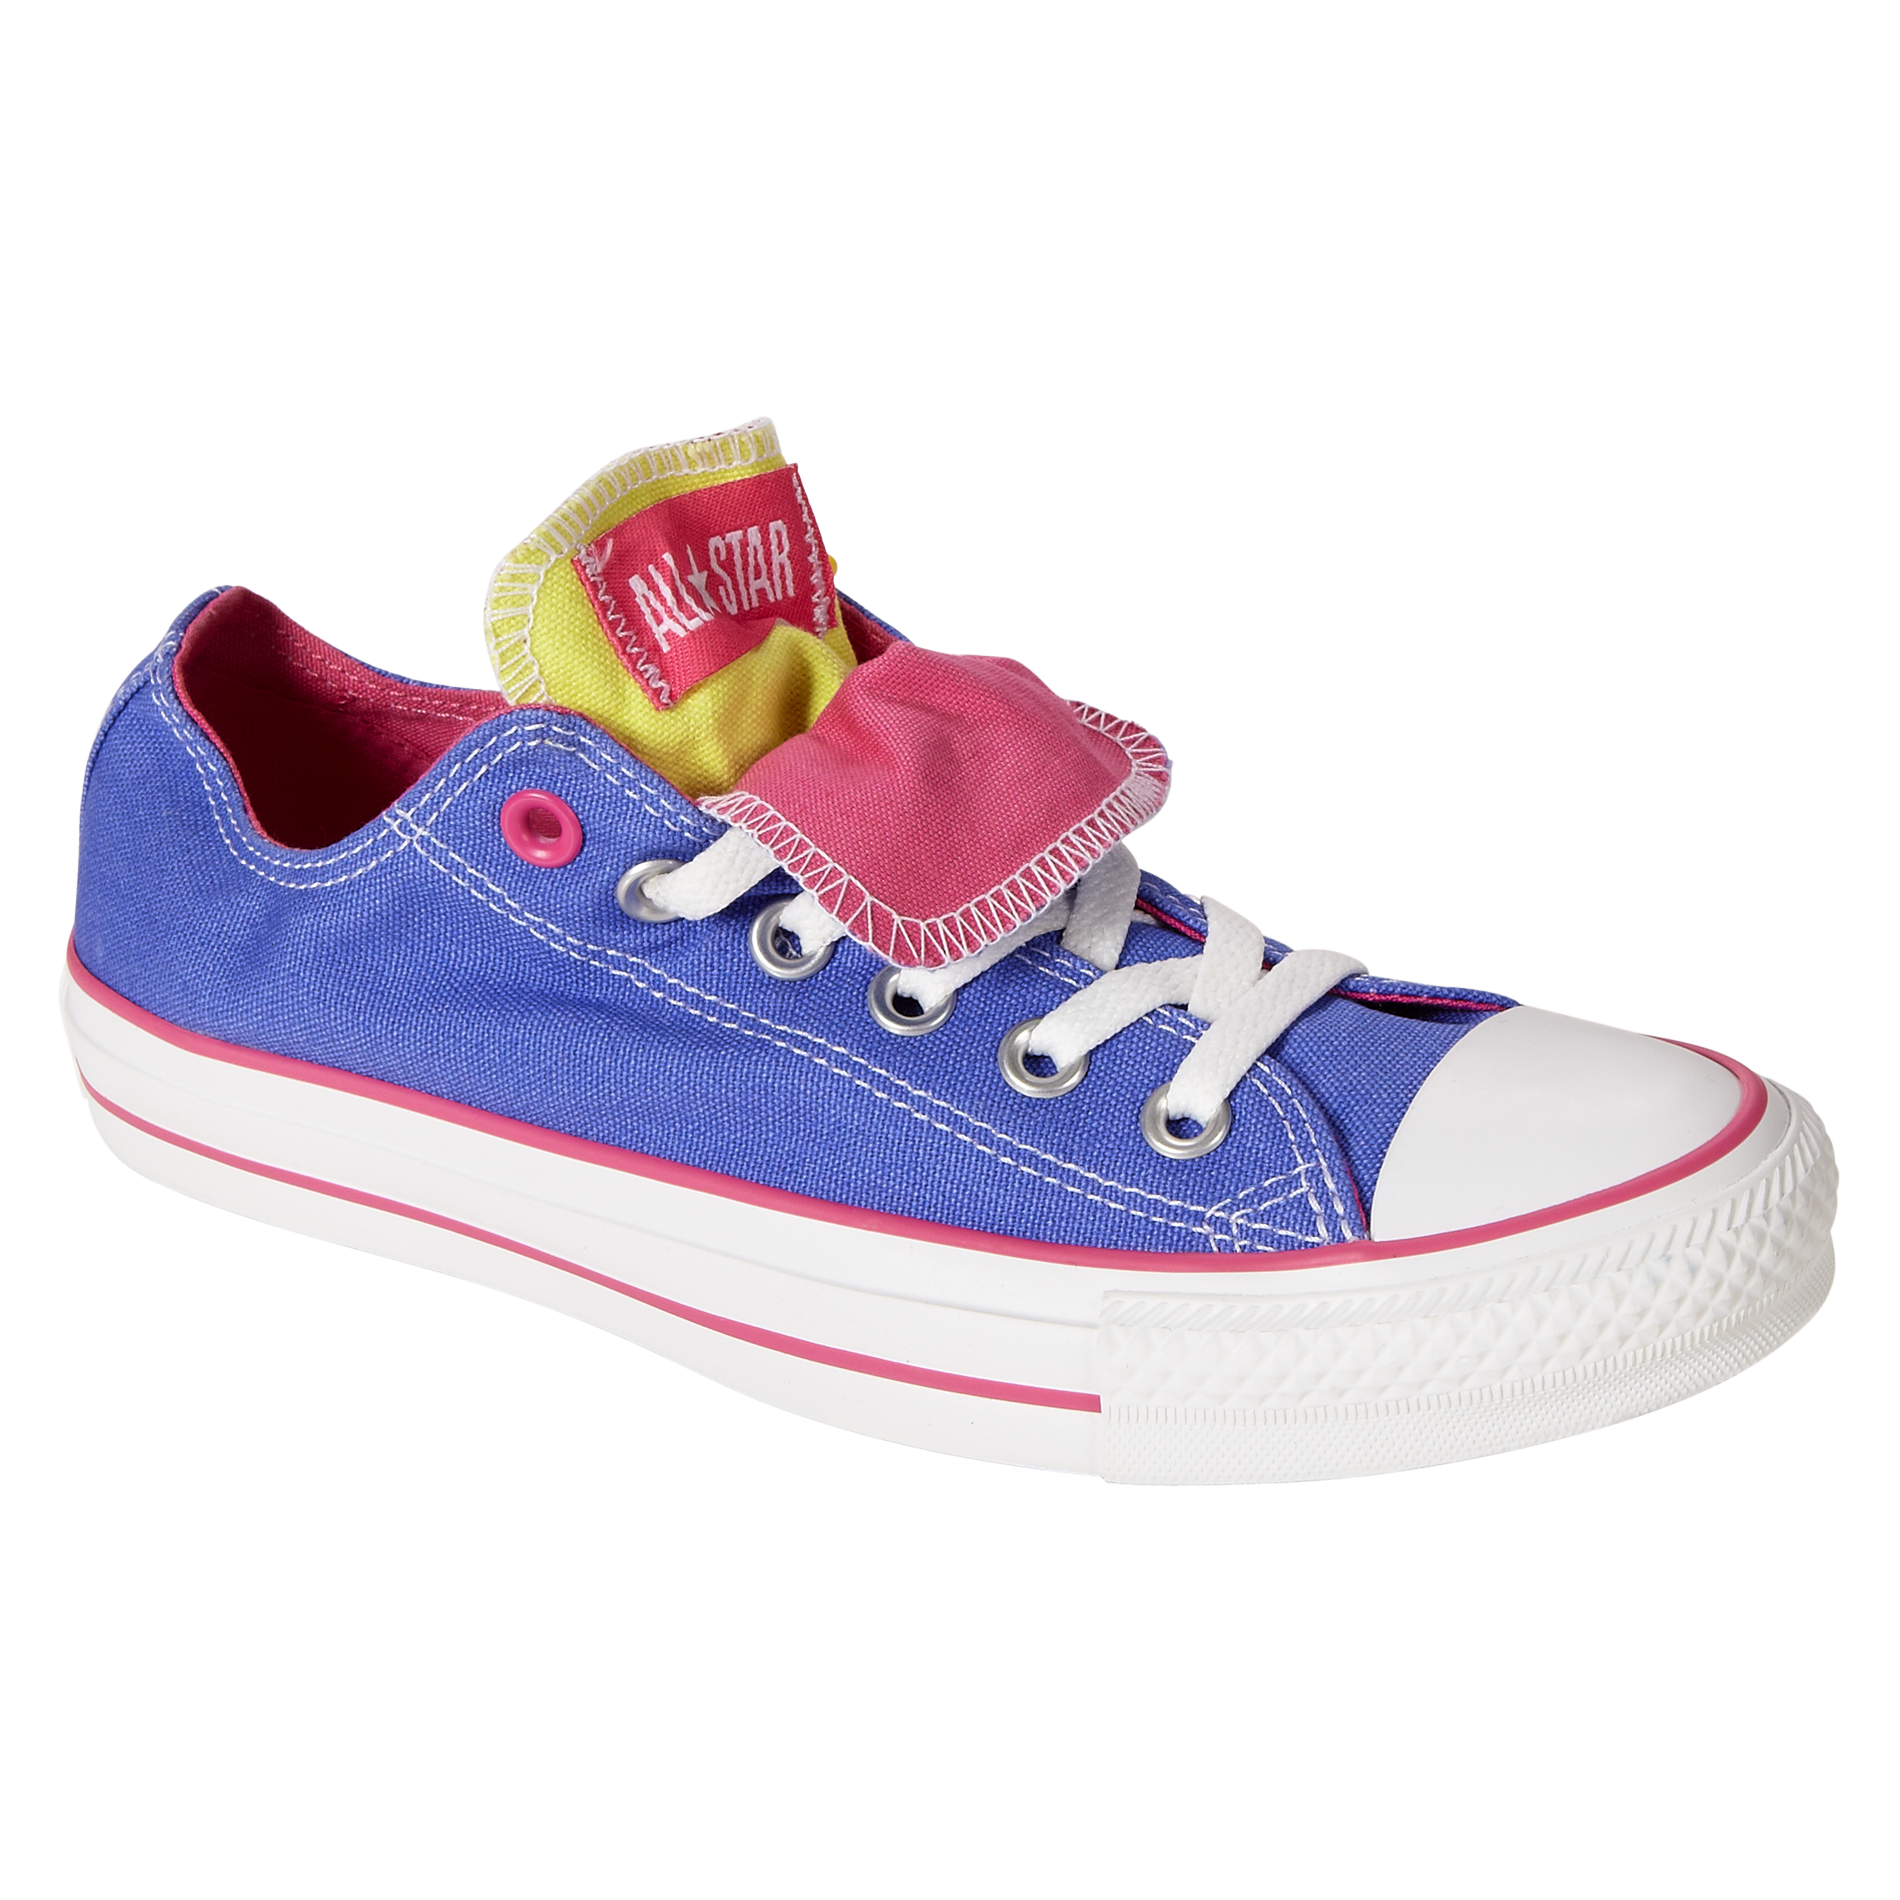 Converse Women's Chuck Taylor All Stars Double Tongue - Blue/Pink